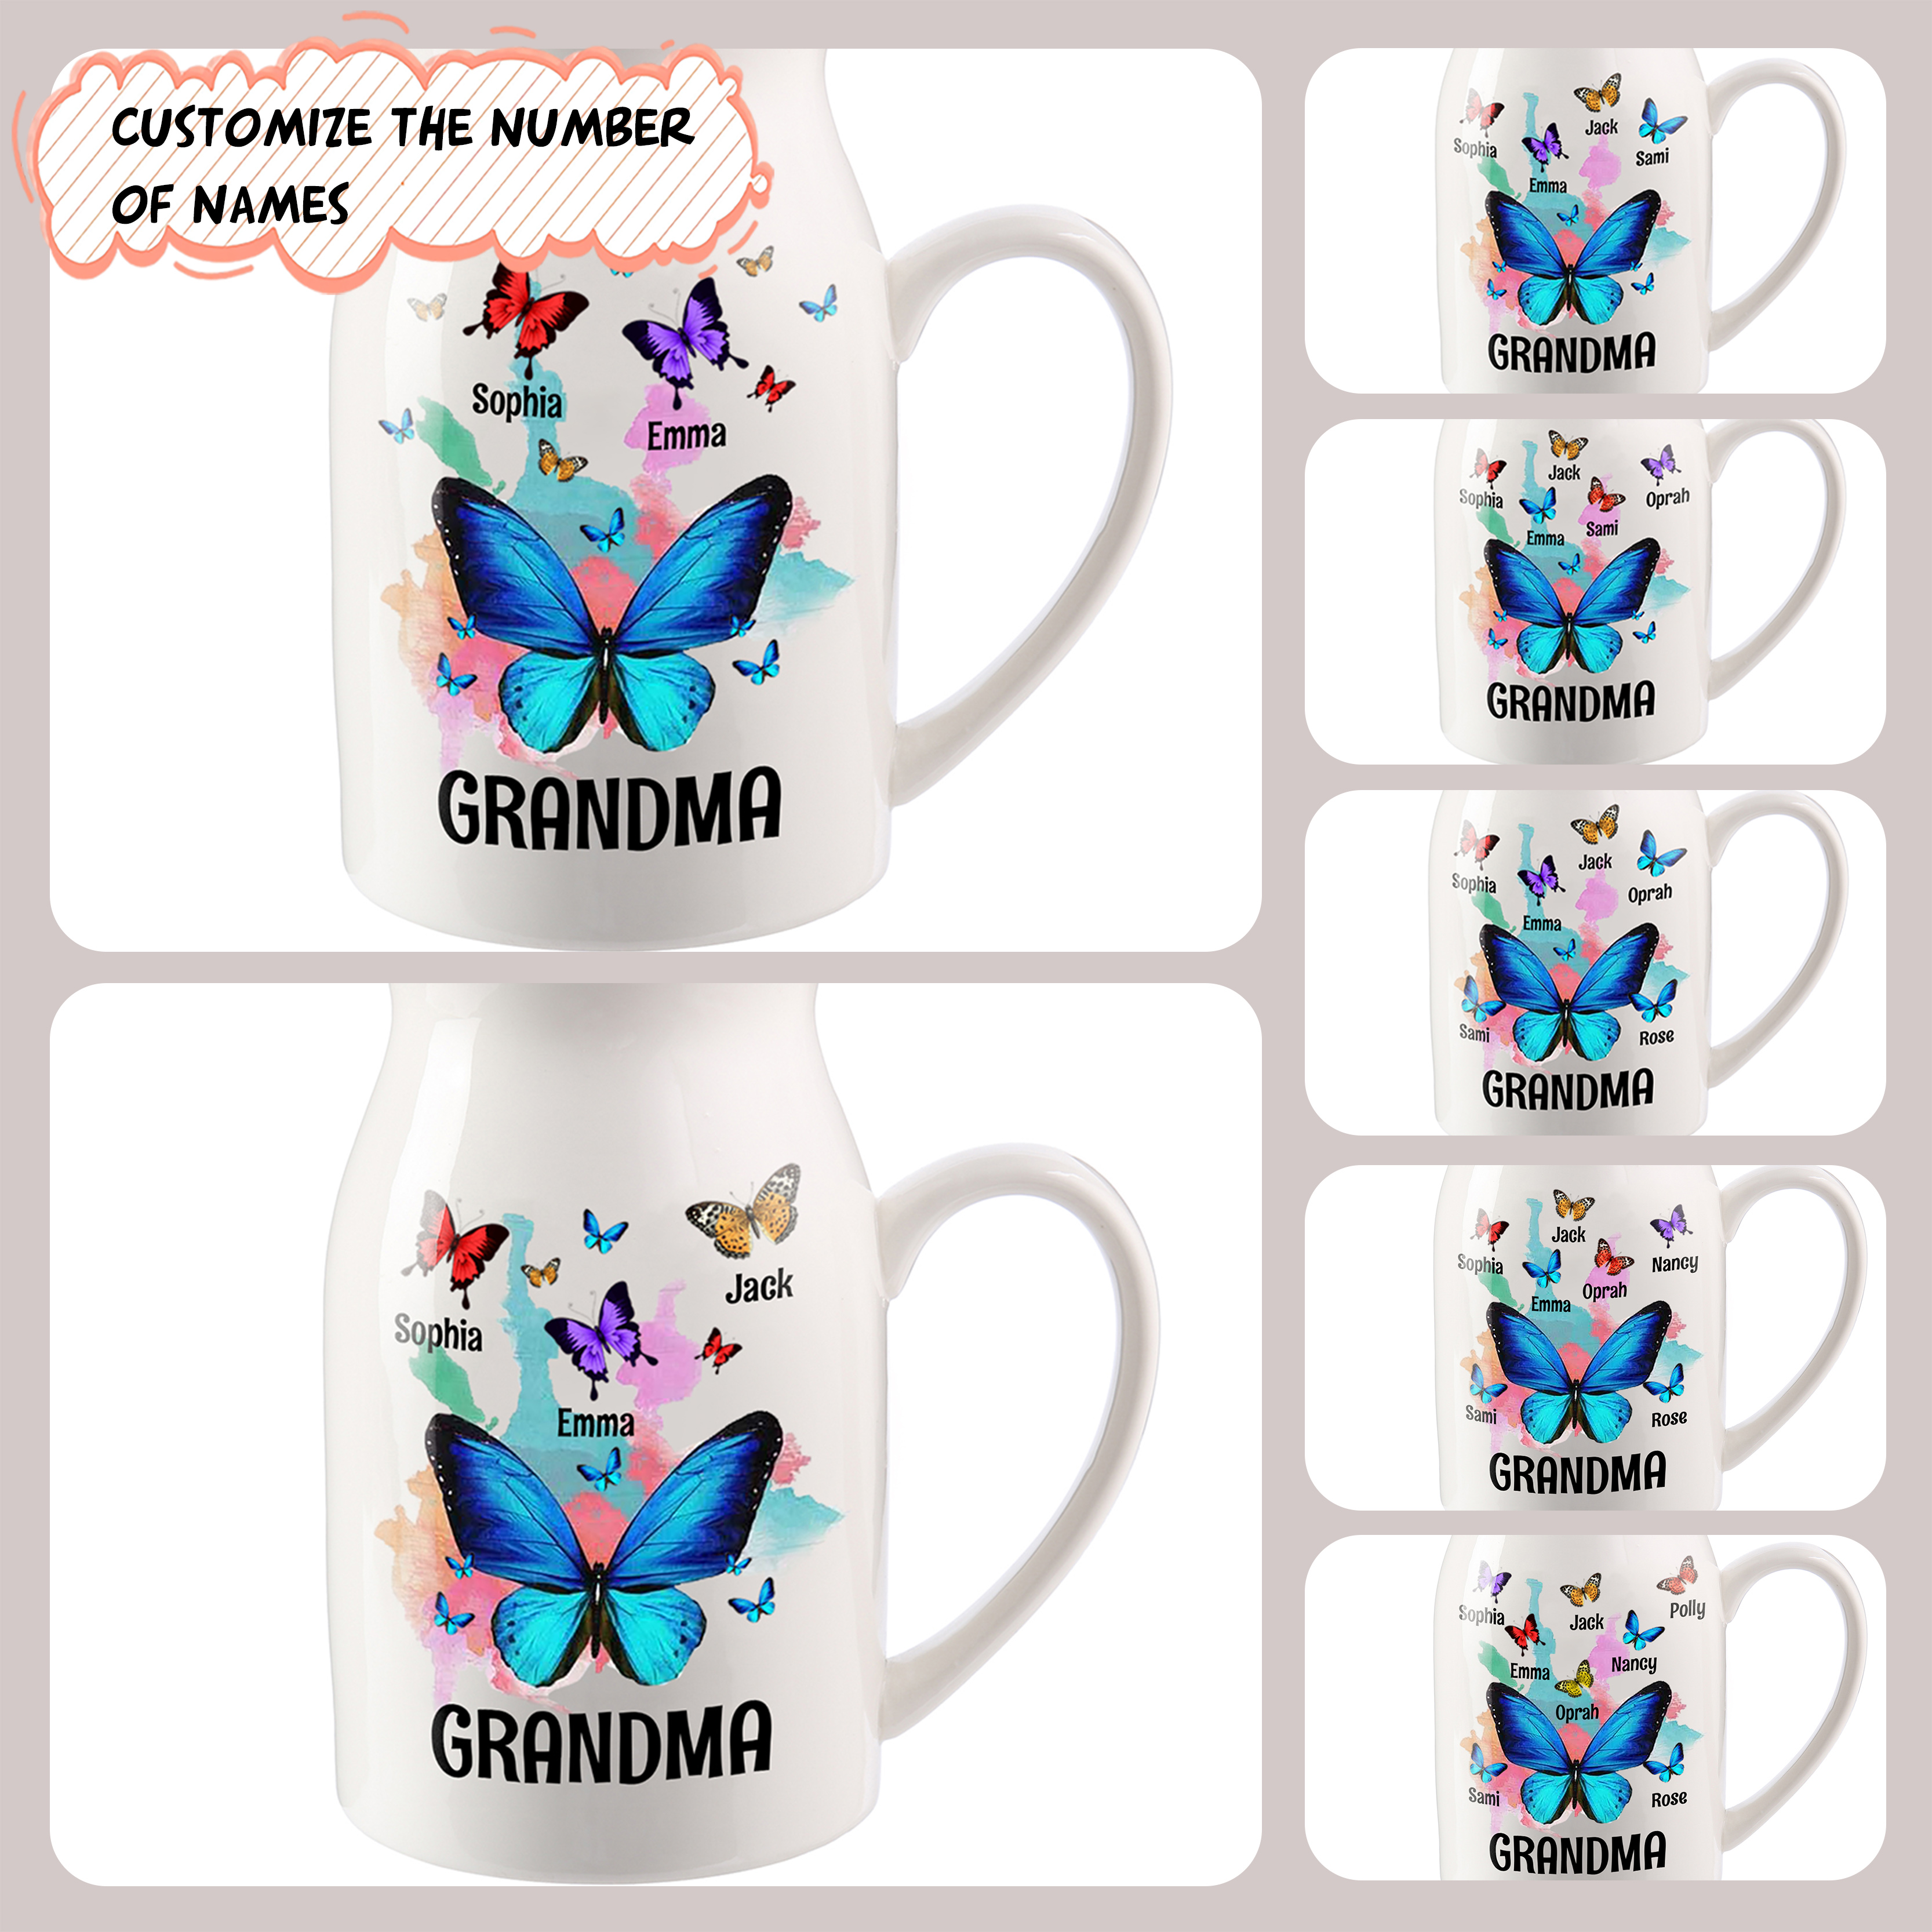 5 Names - Personalized Beautiful Colorful Butterfly Style Ceramic Vase with Customizable Names As a Wonderful Gift For Grandma